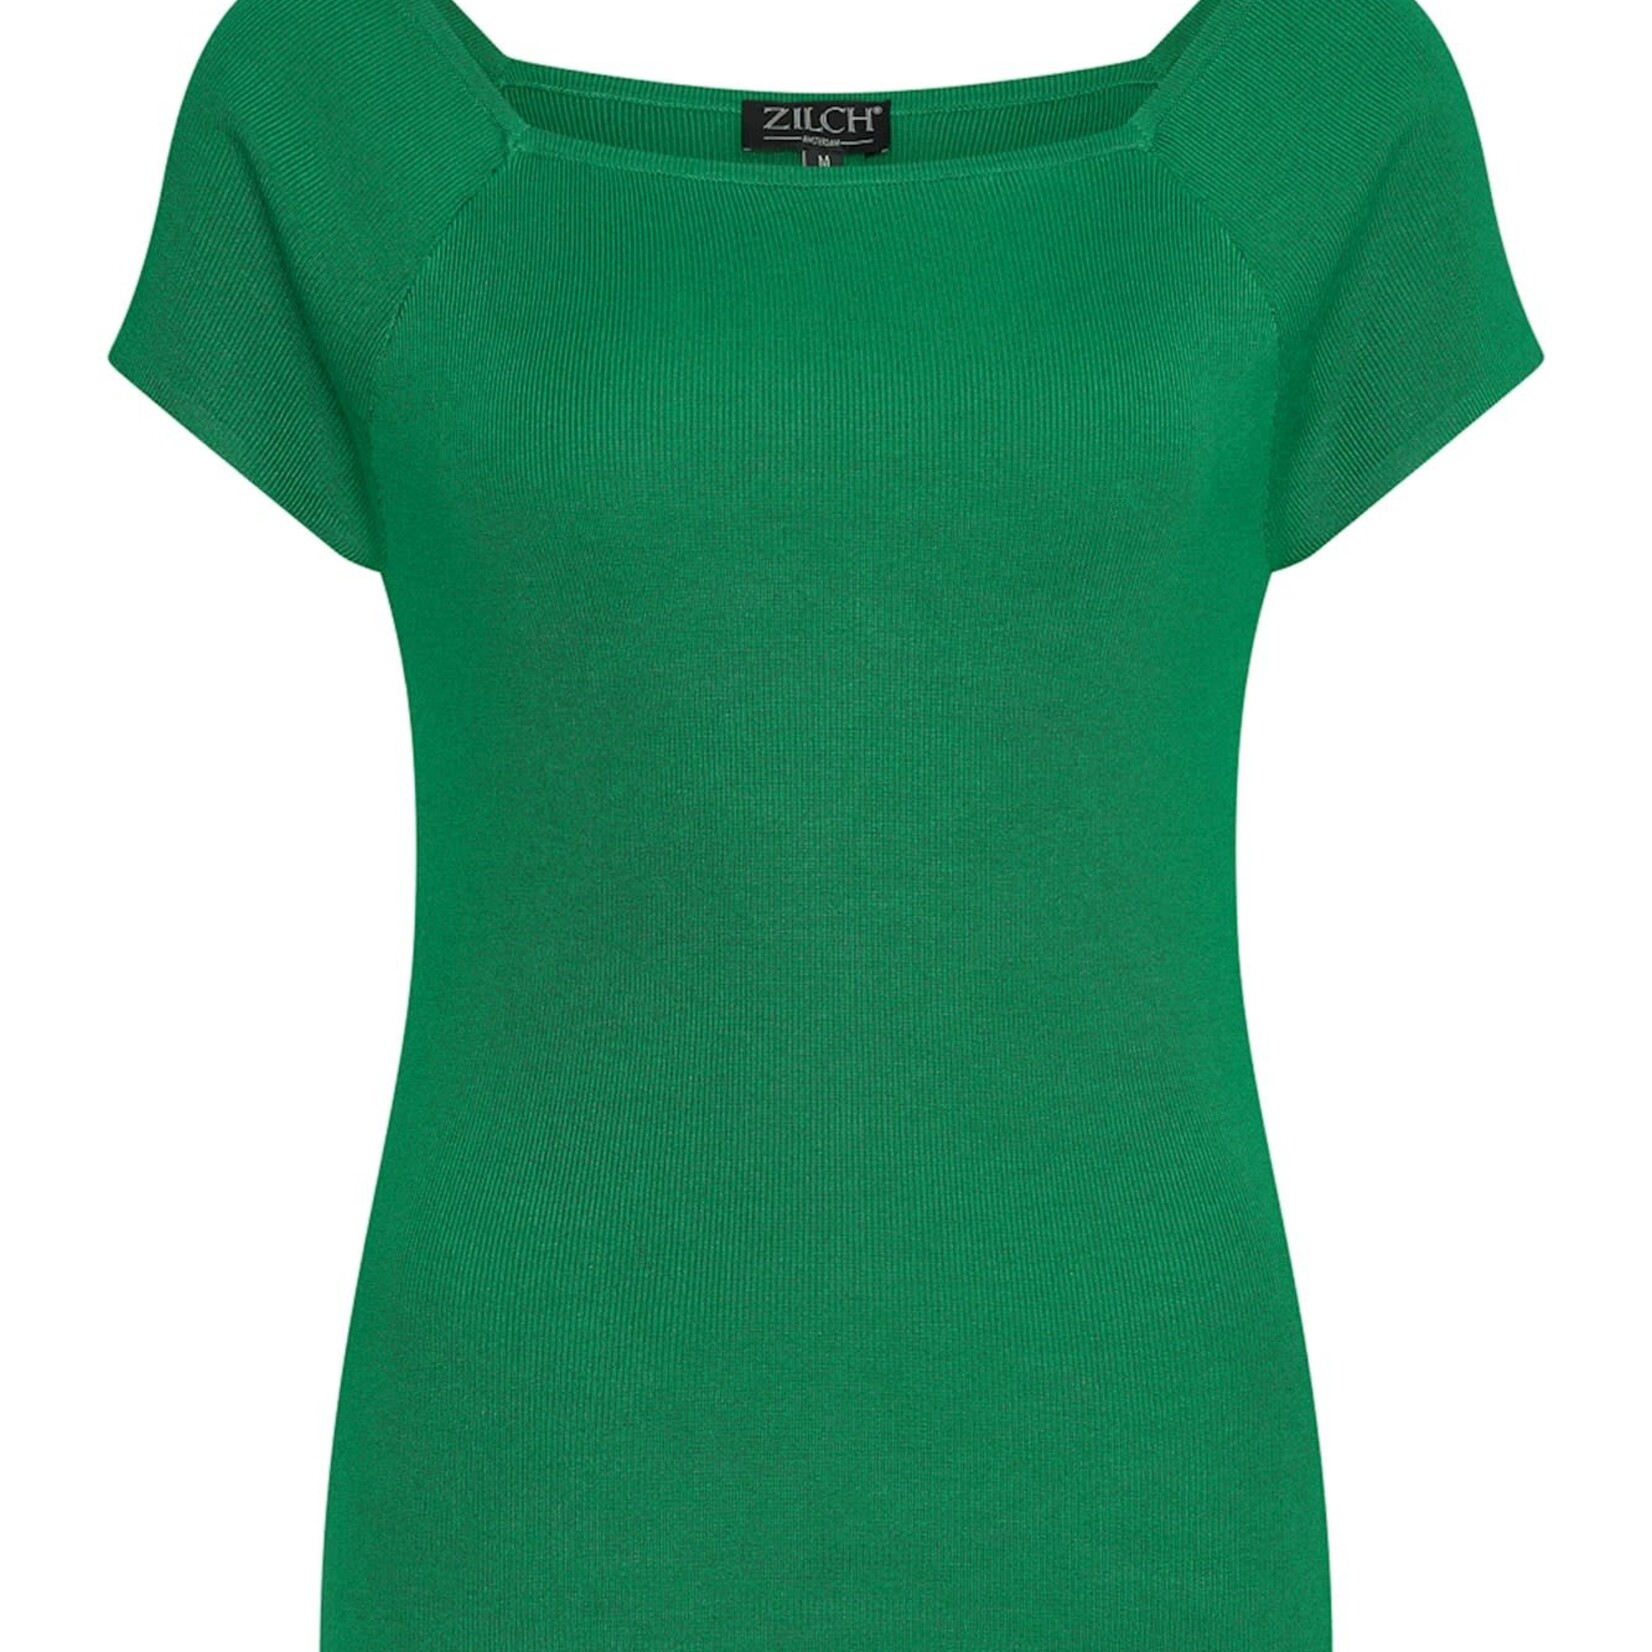 ZILCH ZILCH SHORT SLEEVE BAMBOO TOP APPLE